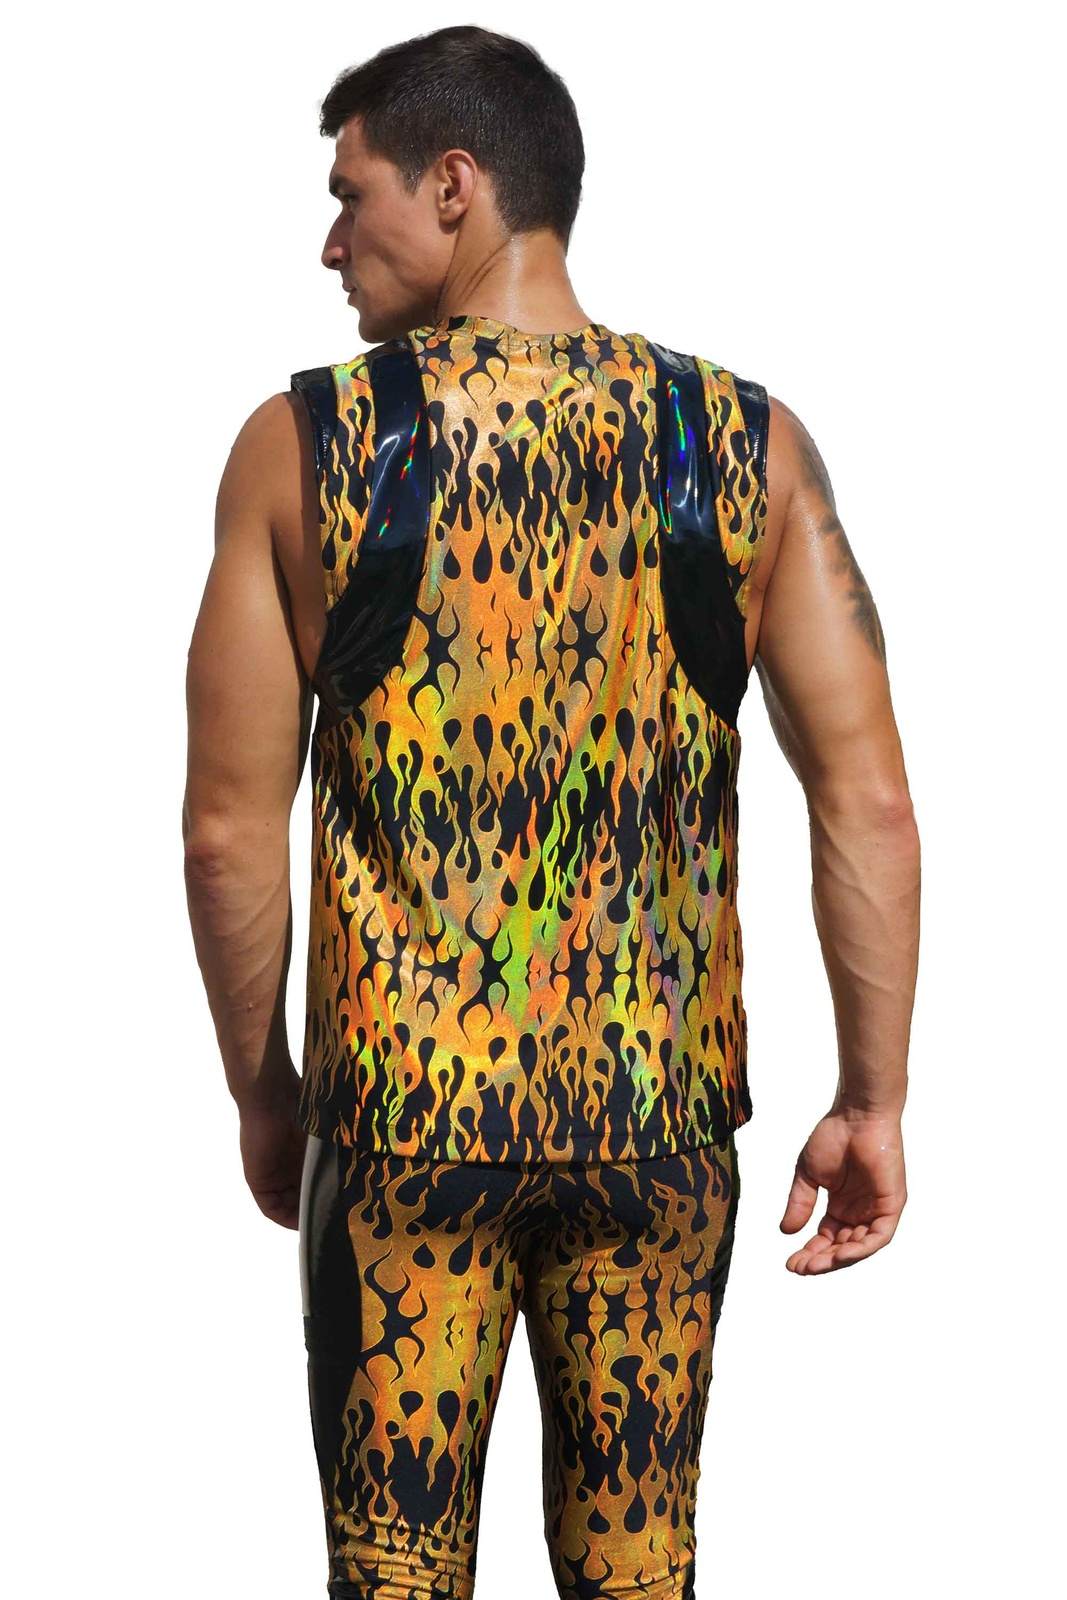 mens black and gold festival tank top from Love Khaos